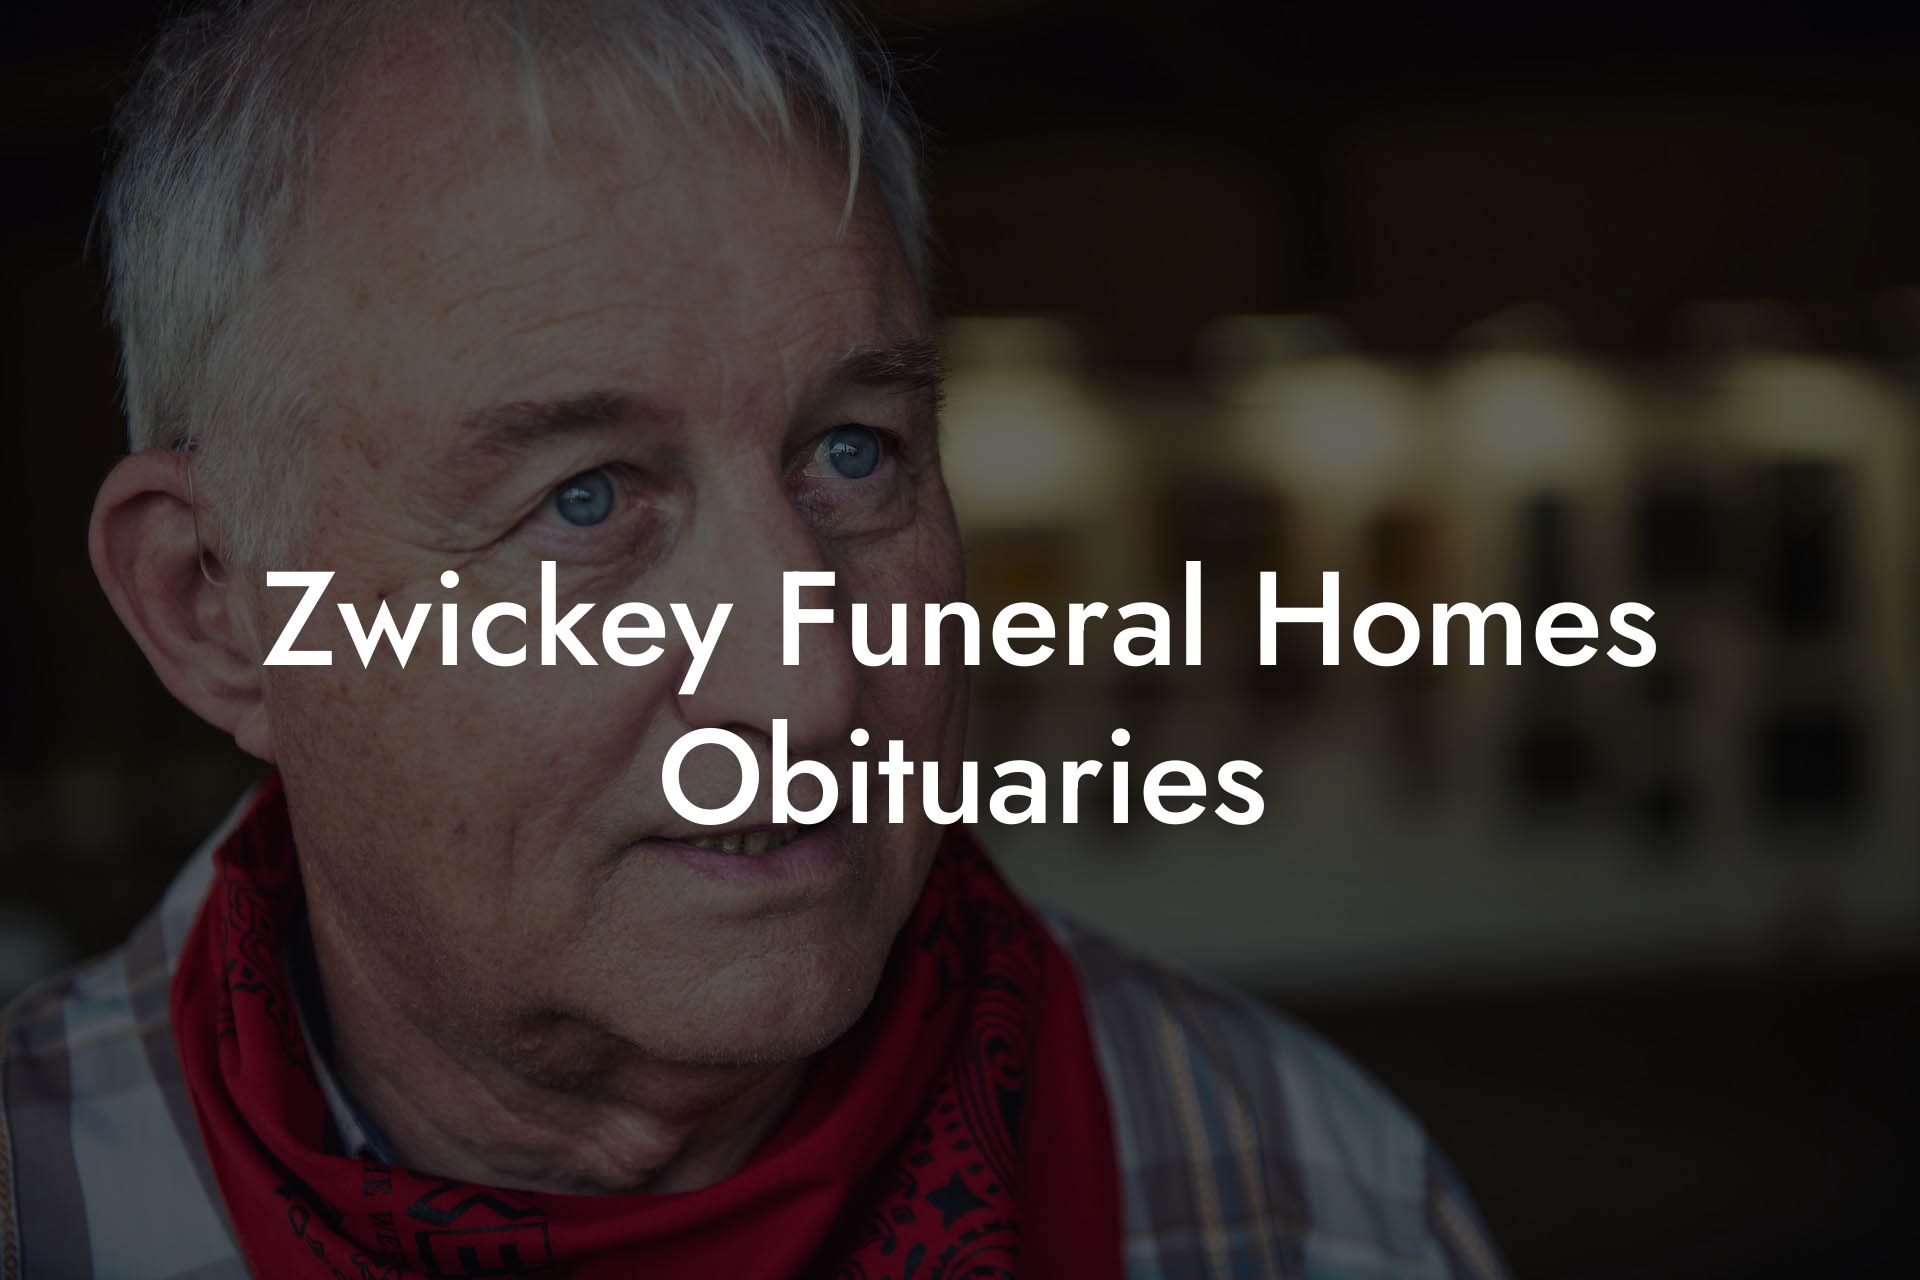 Zwickey Funeral Homes Obituaries